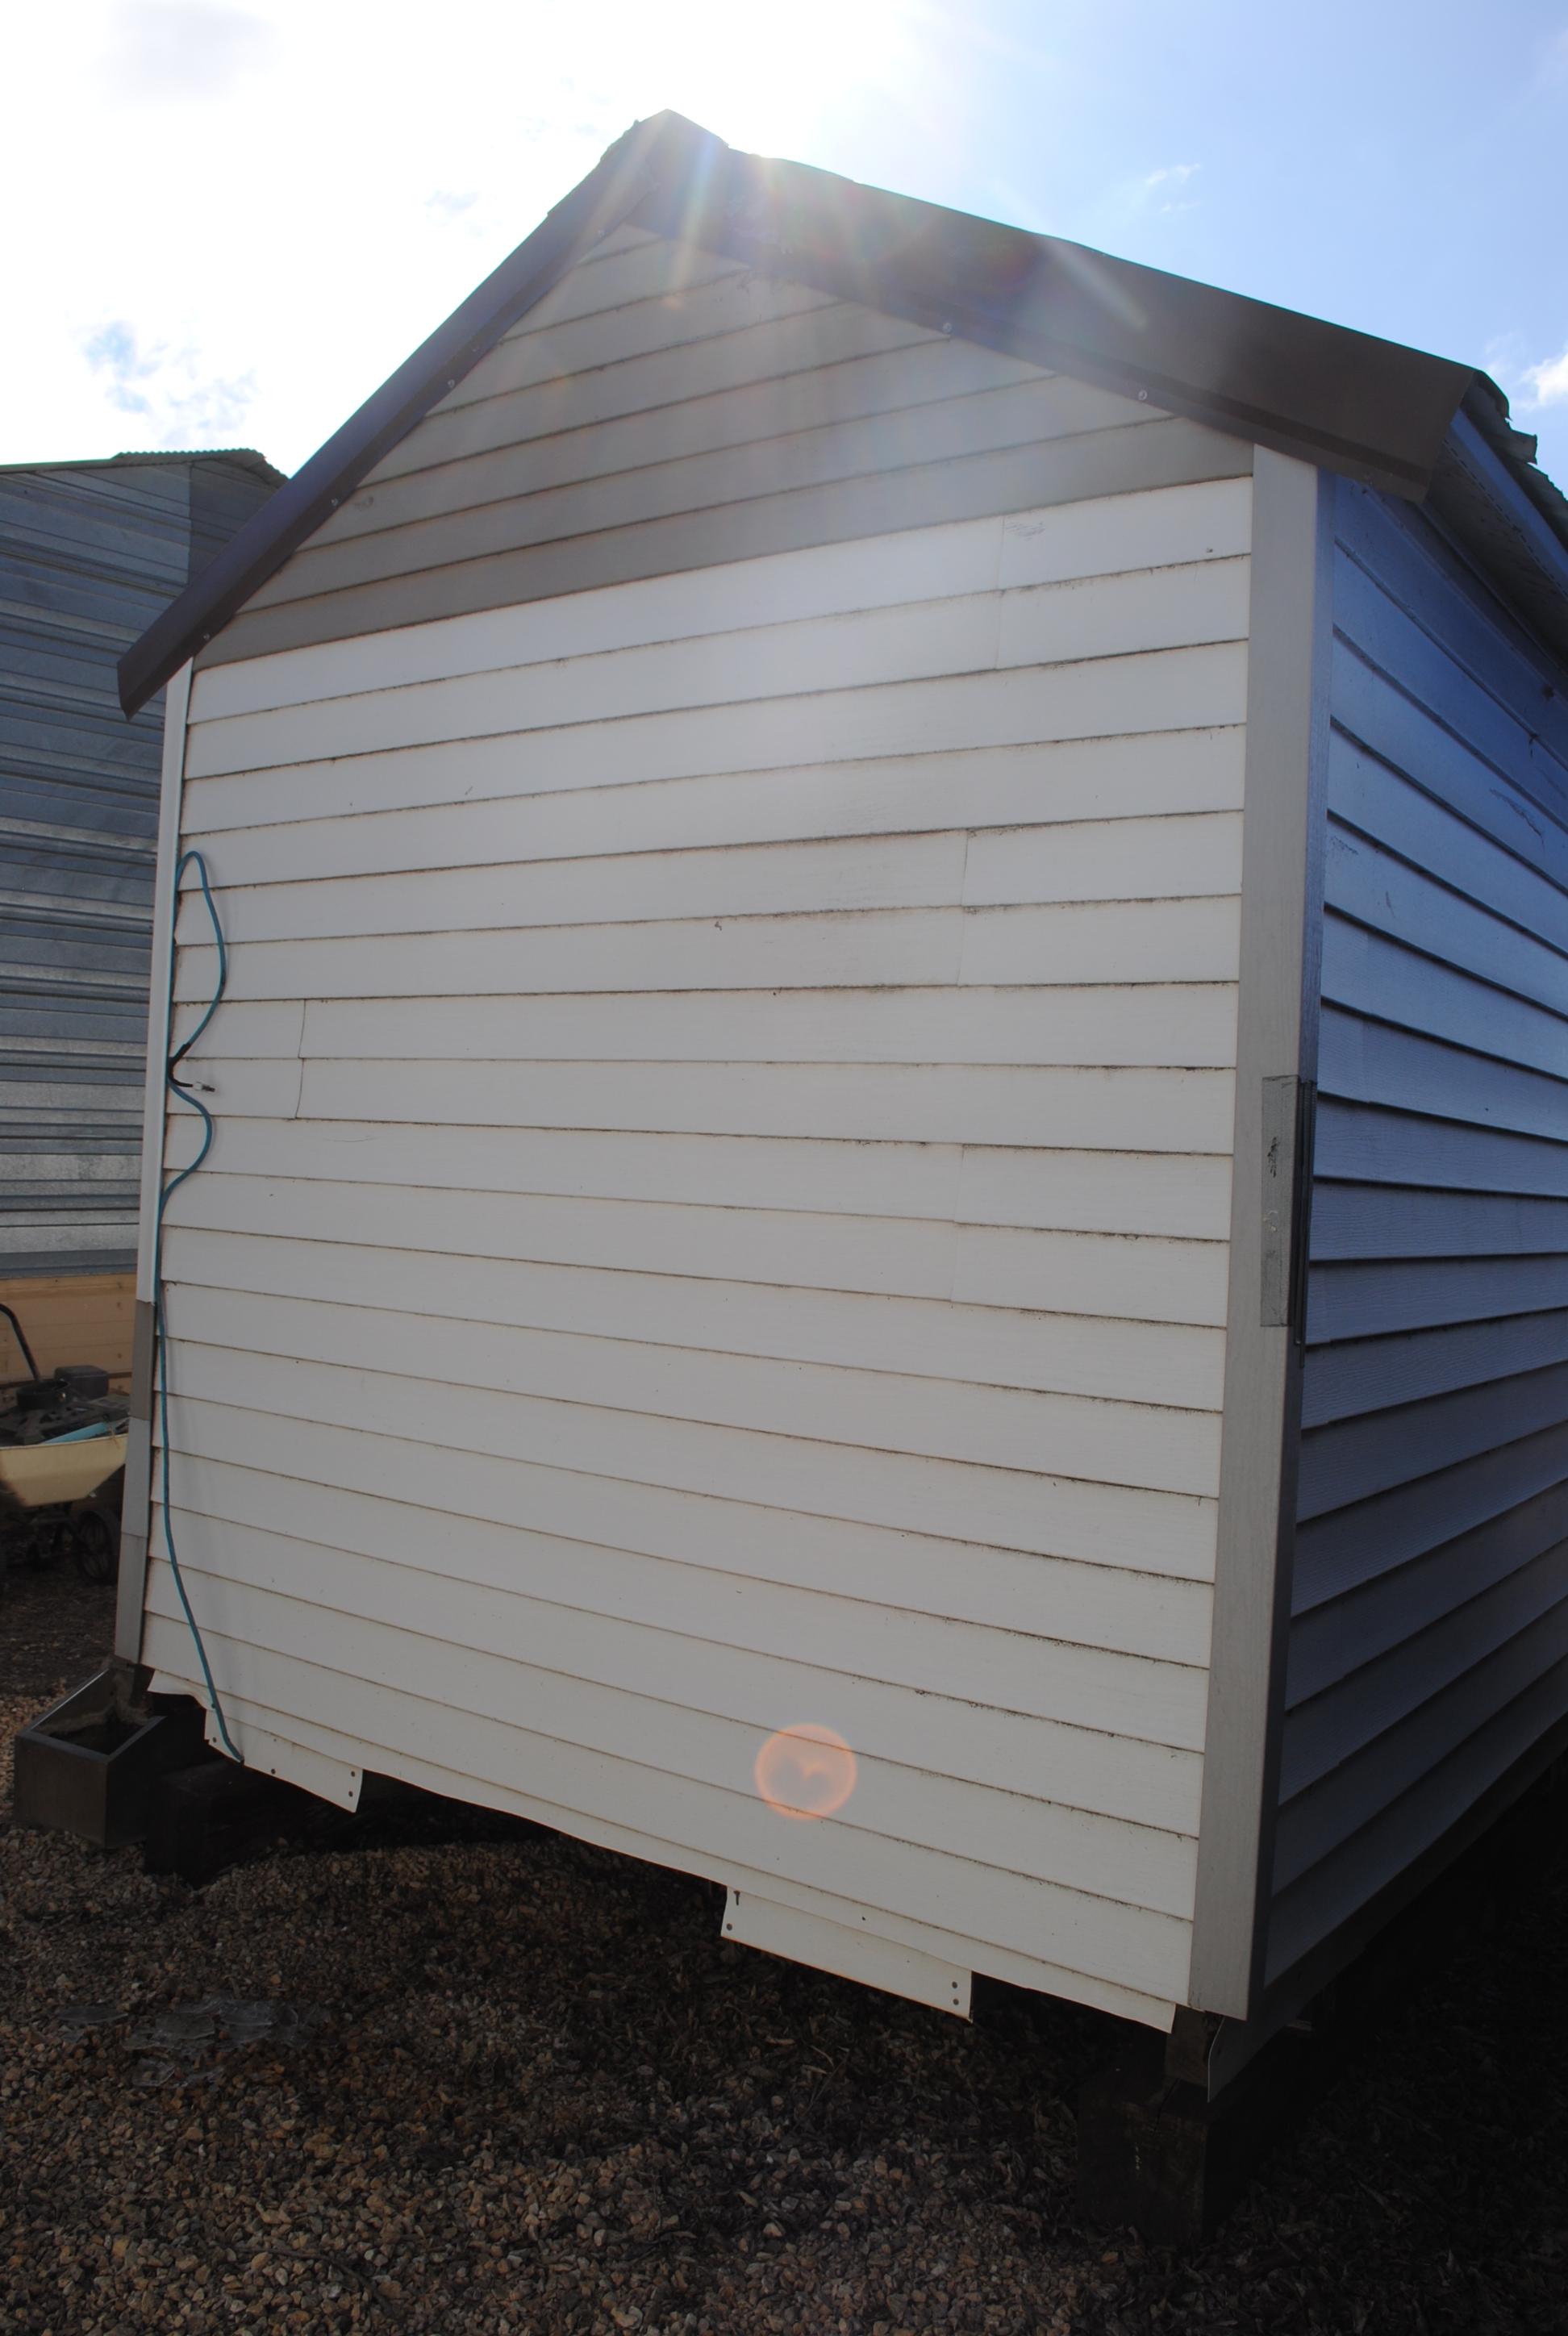 White Vinyl Sided Shed approx. 13'x7' with door on one end. Buyer is responsible for removal.